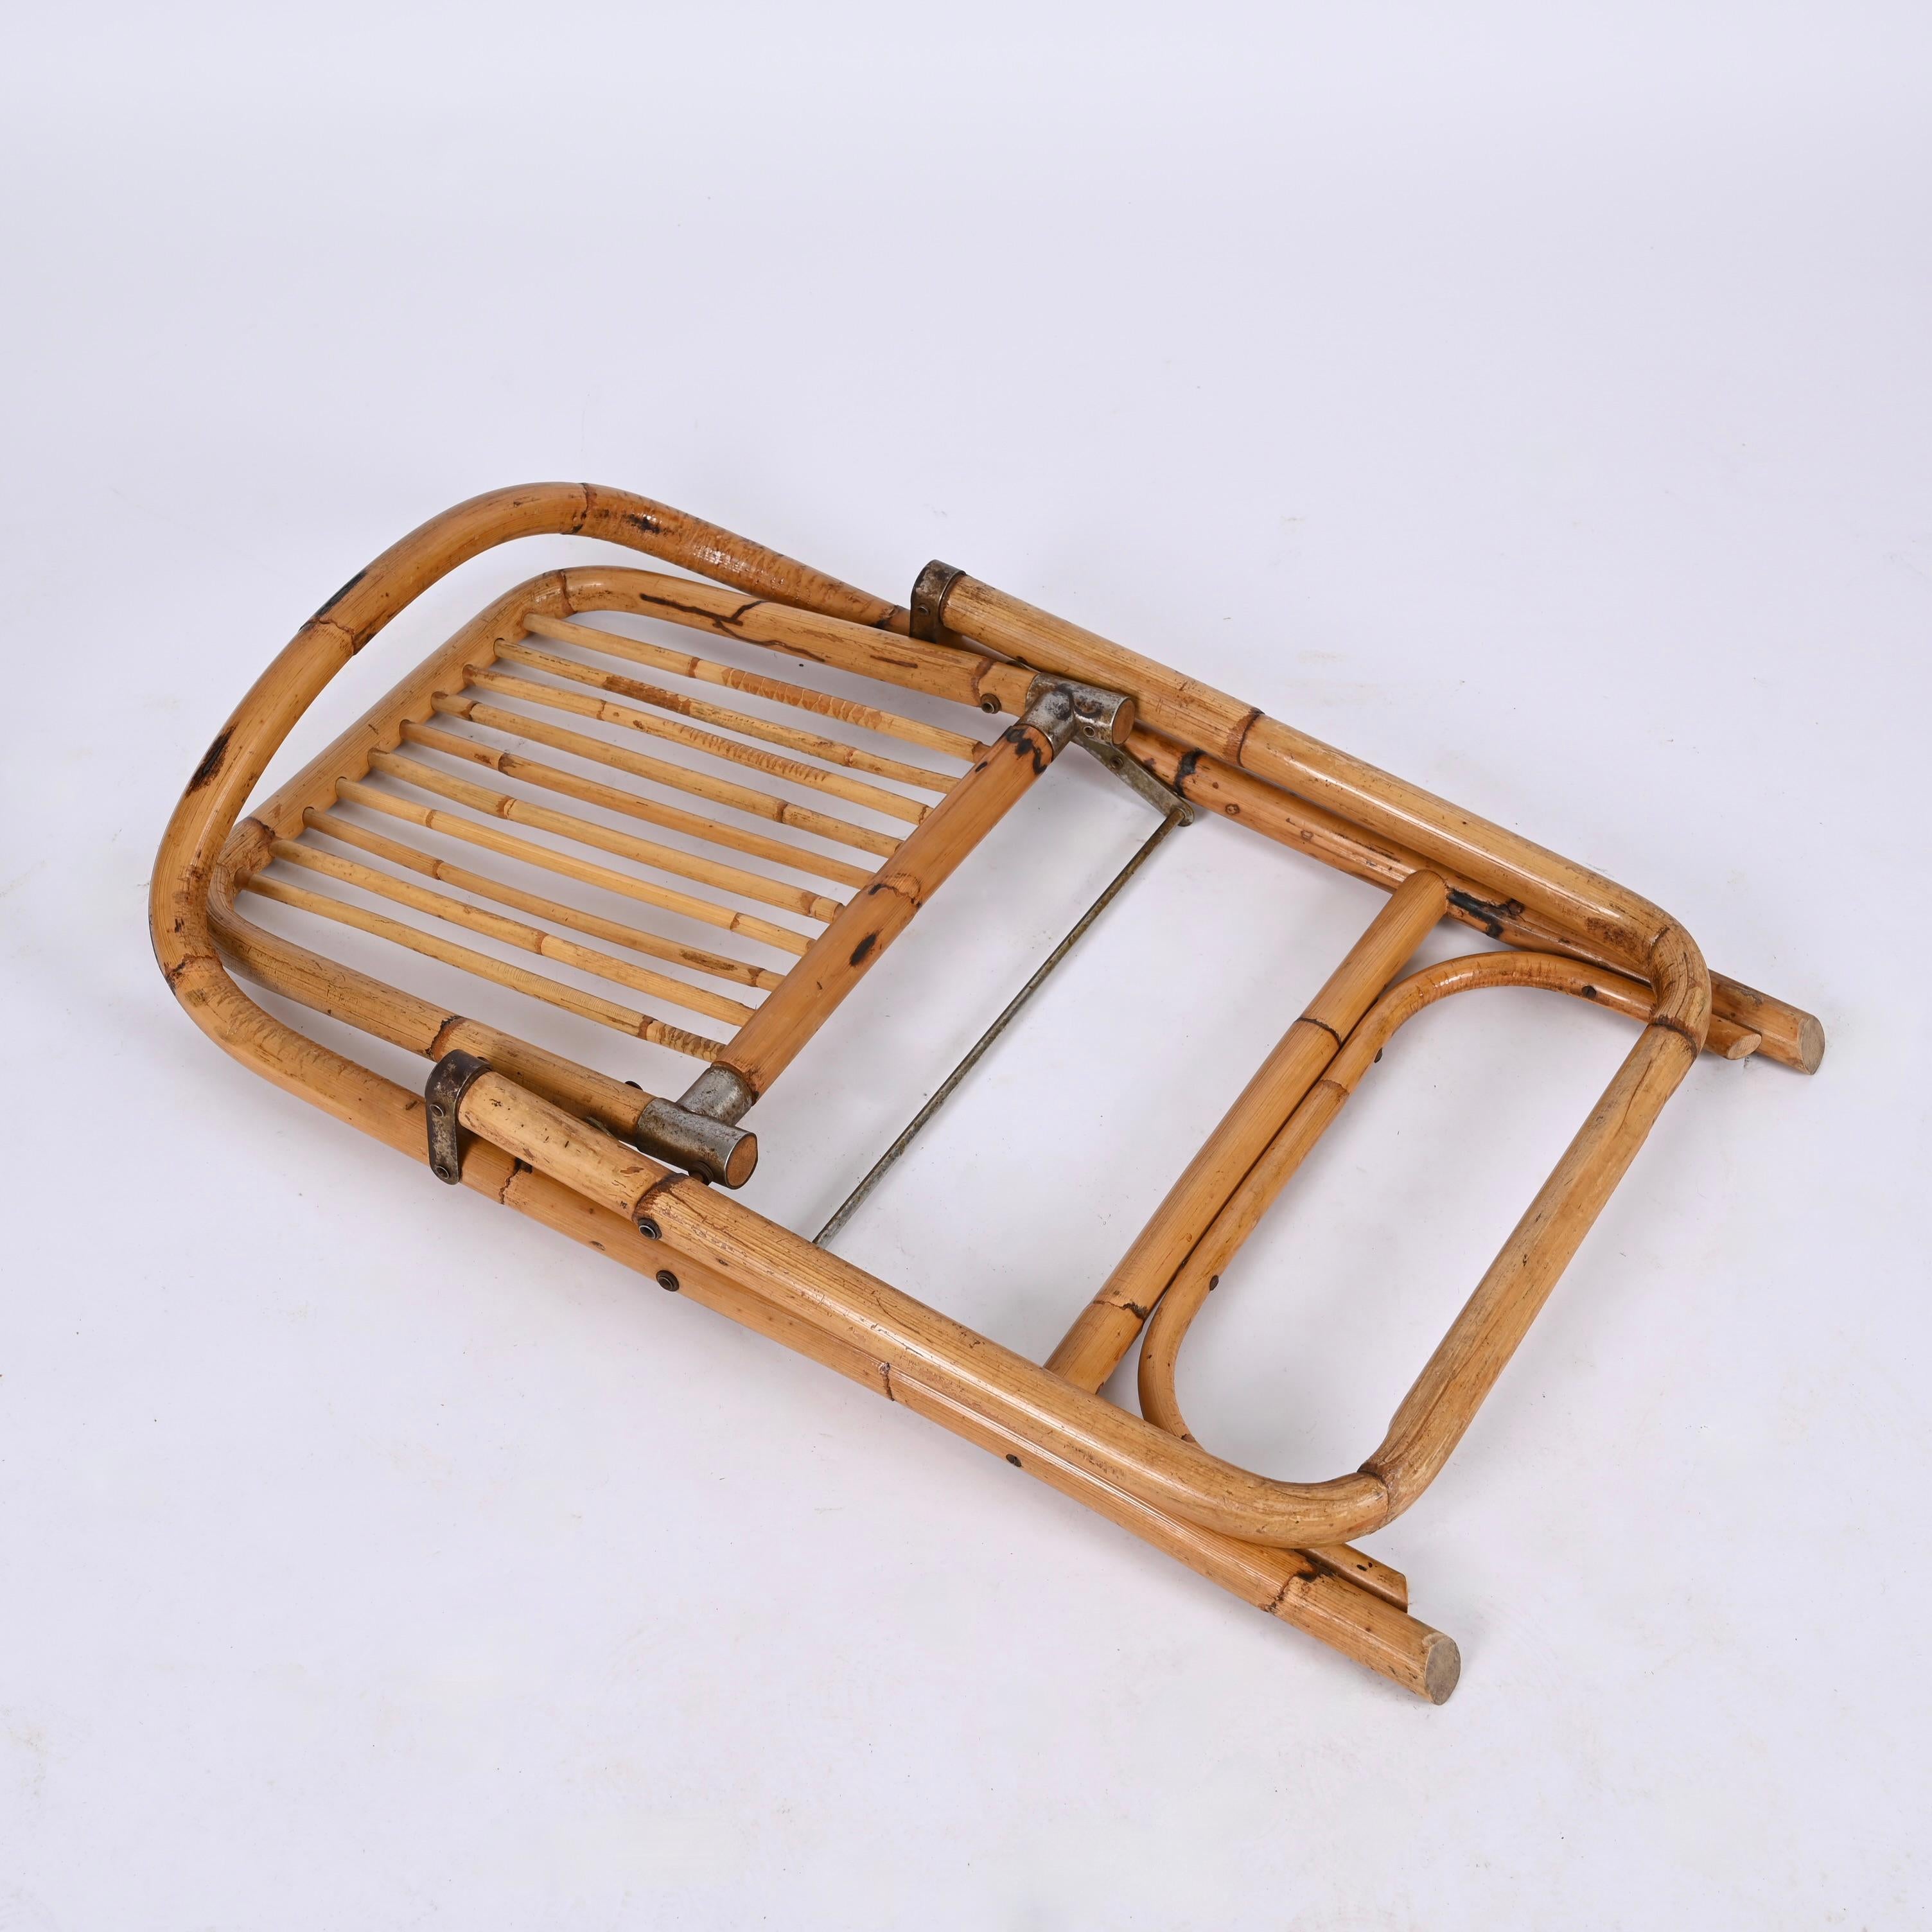 Dal Vera Bamboo Folding Chairs, Italy, 1960s For Sale 6